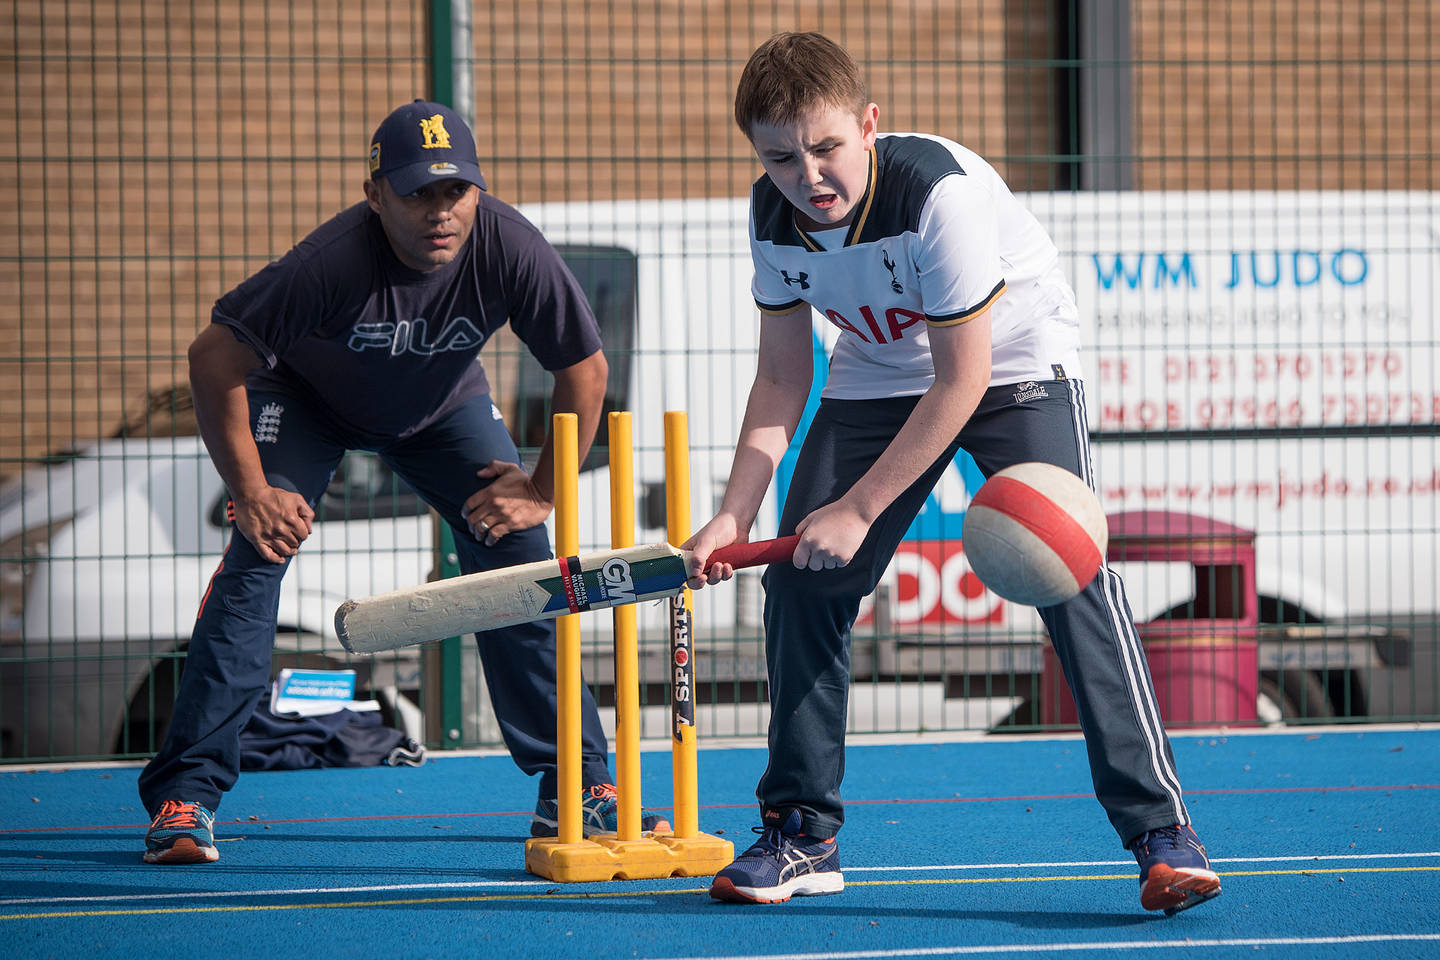 Visually impaired boy playing cricket. photo credit: British Blind Sport